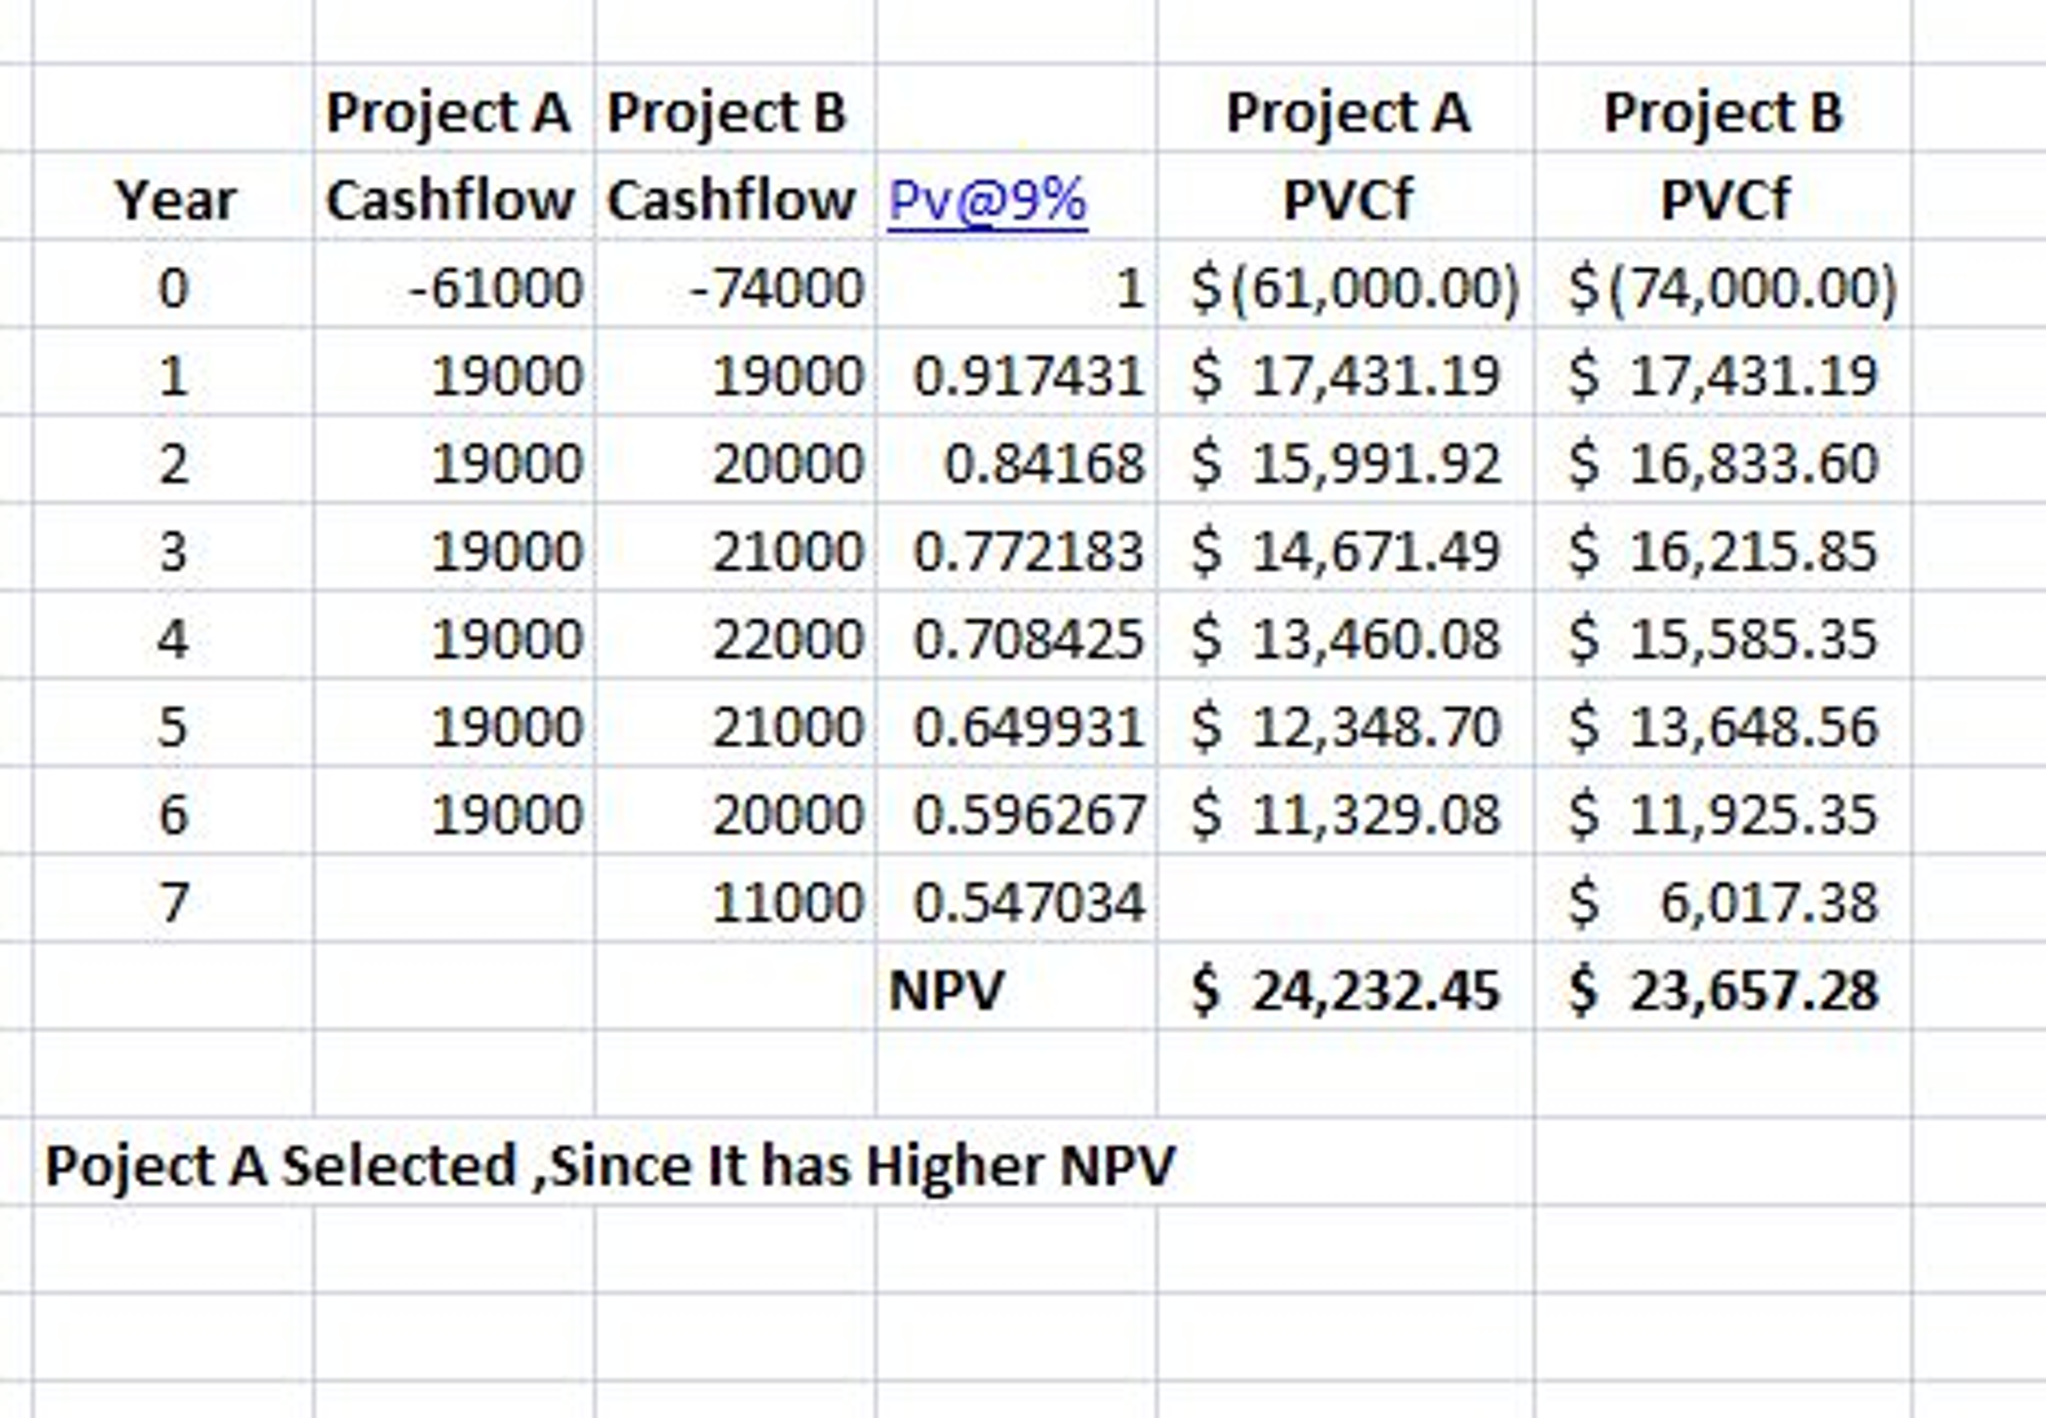 Project A Project lB Cashflow Cashflow Pv@9% Project A PVCf Project B PVCF Year 0 61000 74000 1 $(61,000.00) $(74,000.00) 190